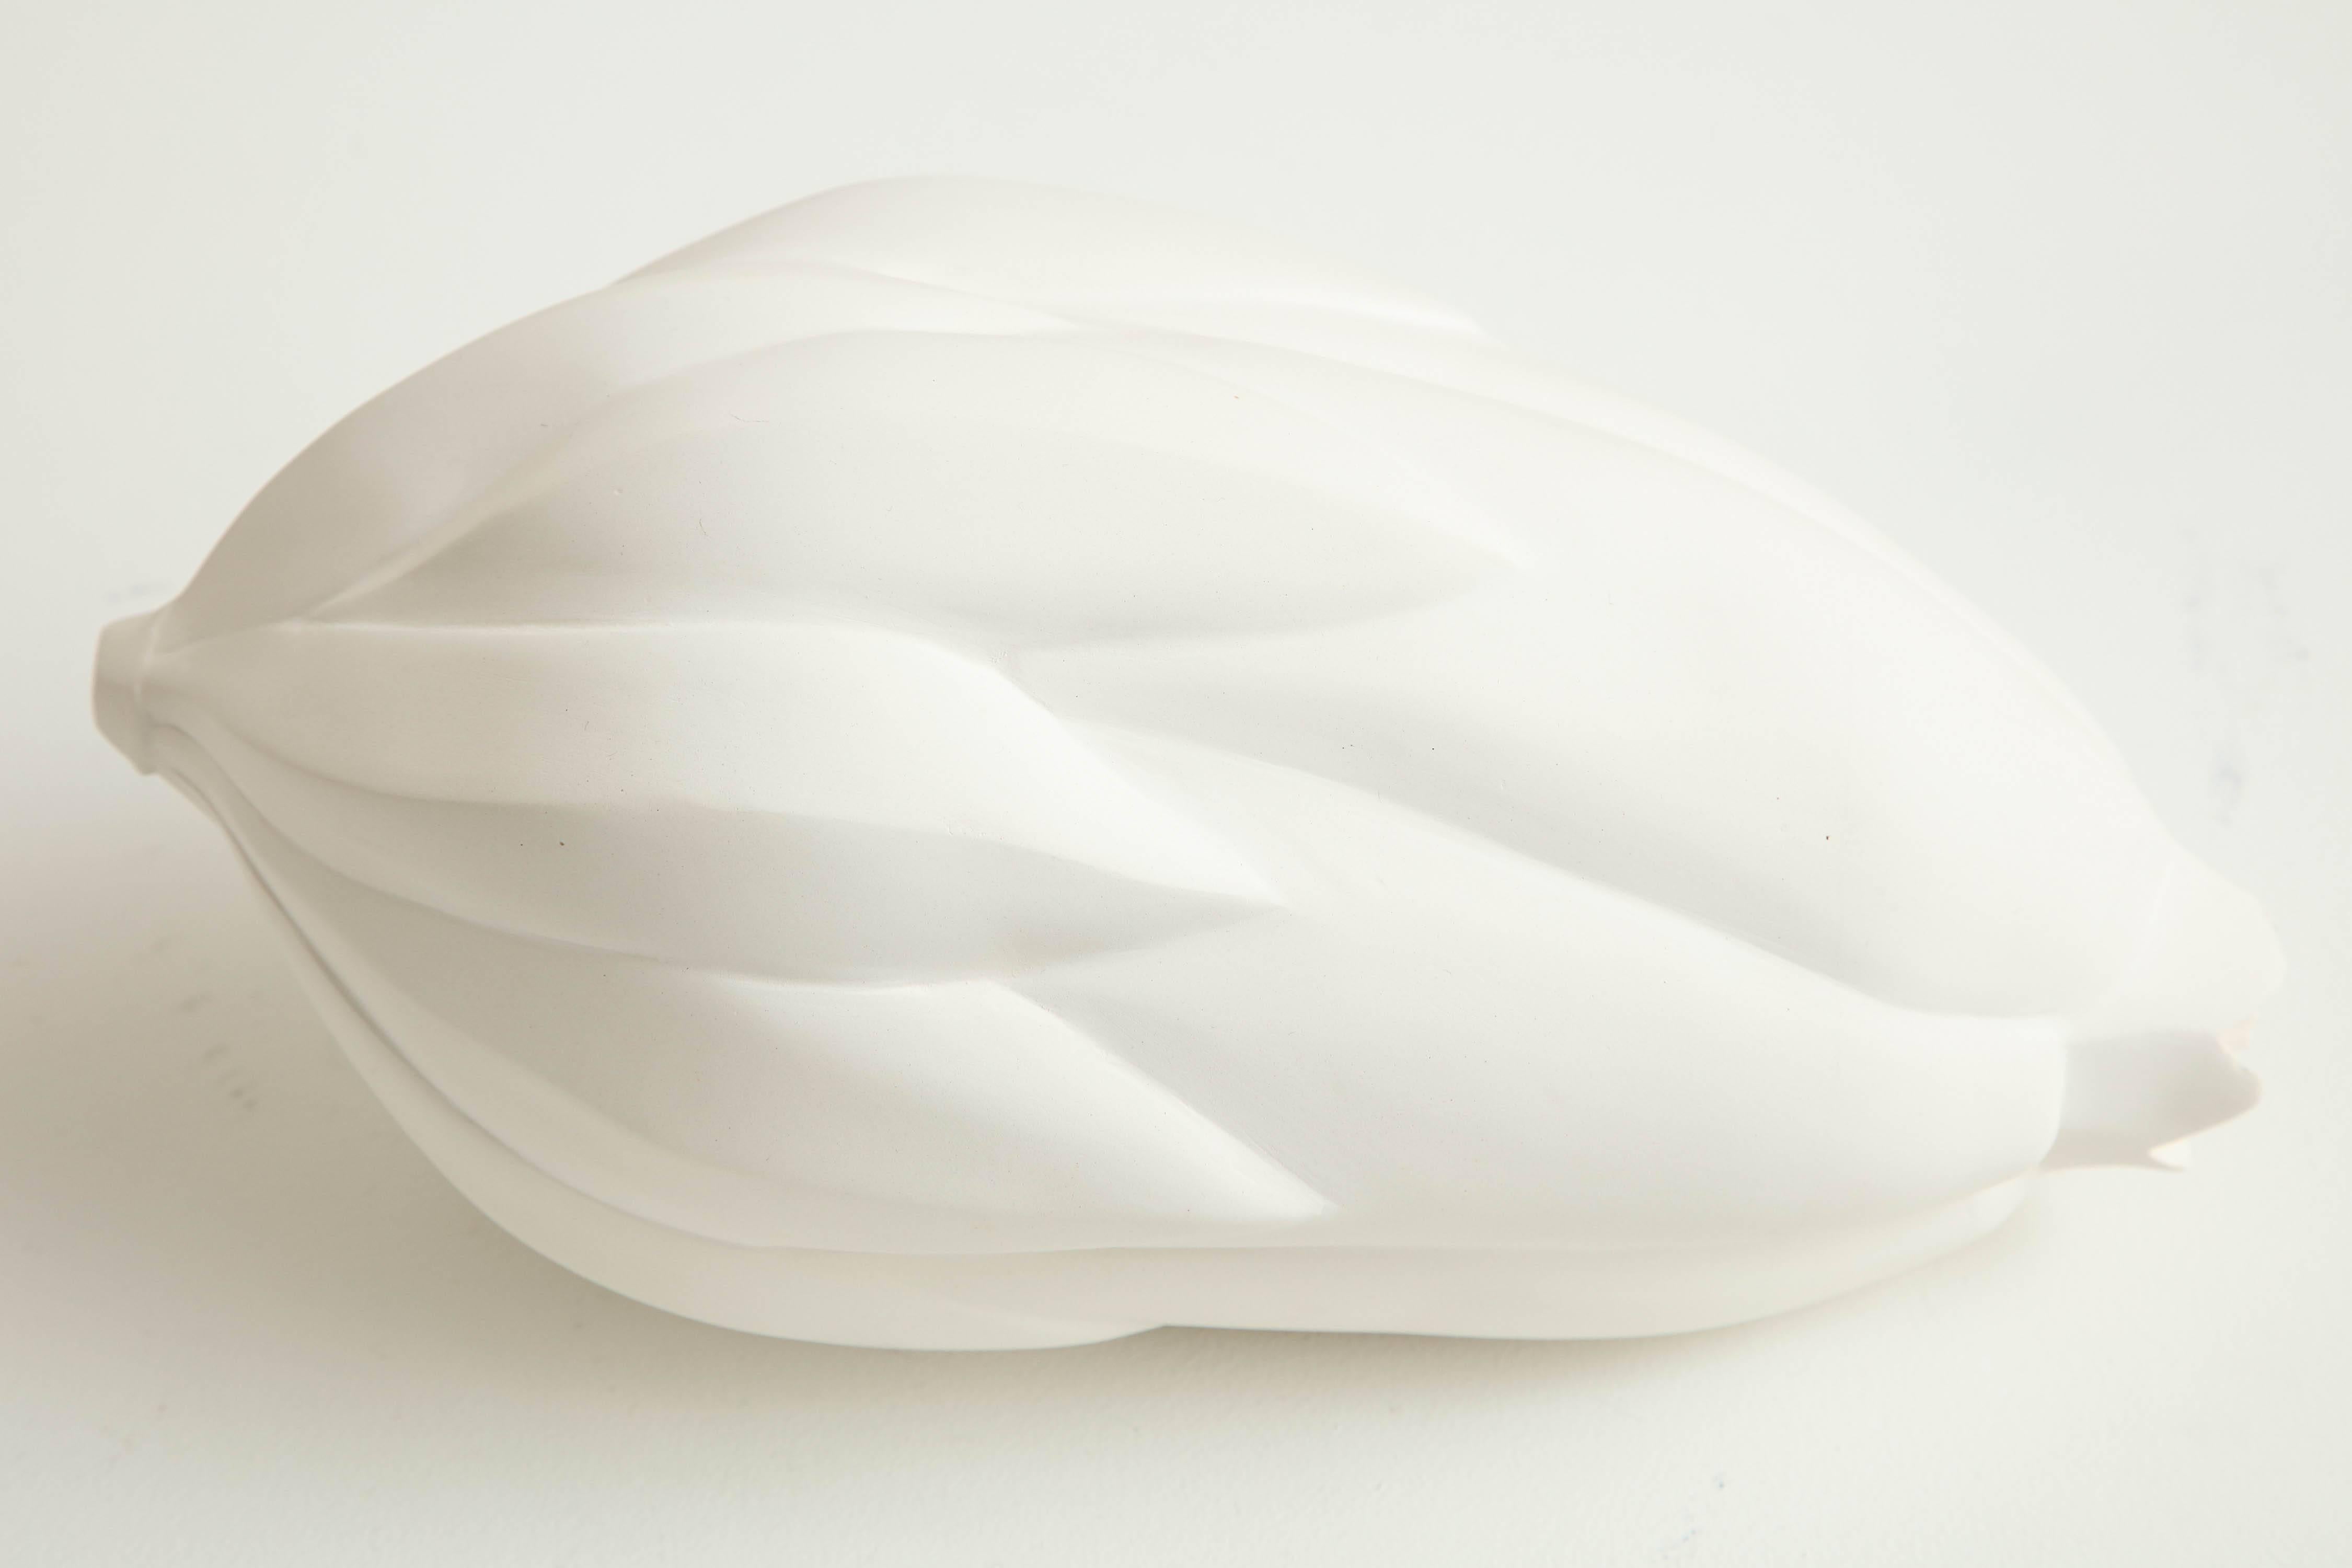 American Large Porcelain Bud in White by Anat Shiftan, 2017